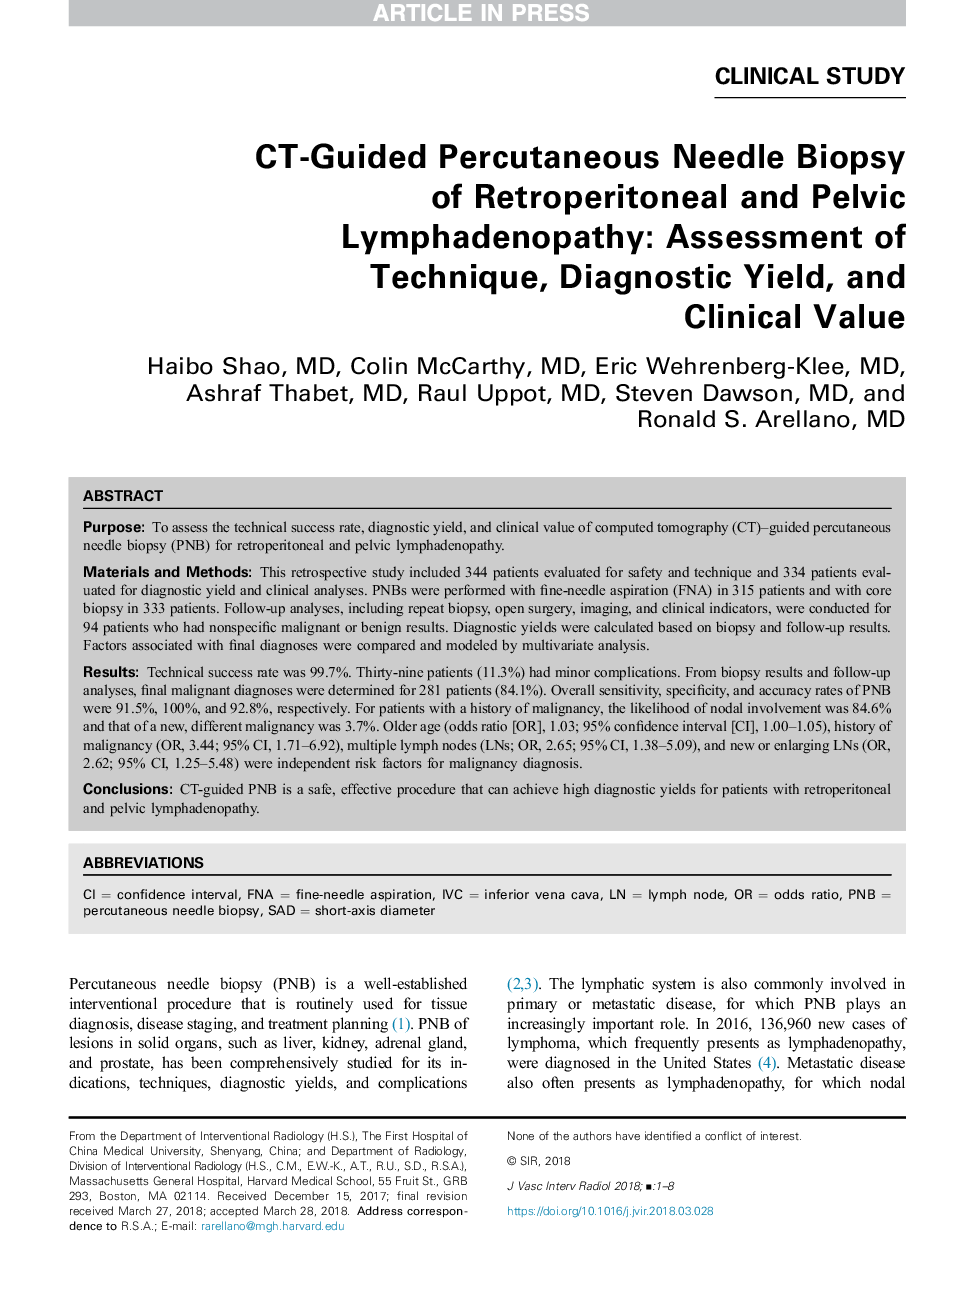 CT-Guided Percutaneous Needle Biopsy of Retroperitoneal and Pelvic Lymphadenopathy: Assessment of Technique, Diagnostic Yield, and Clinical Value